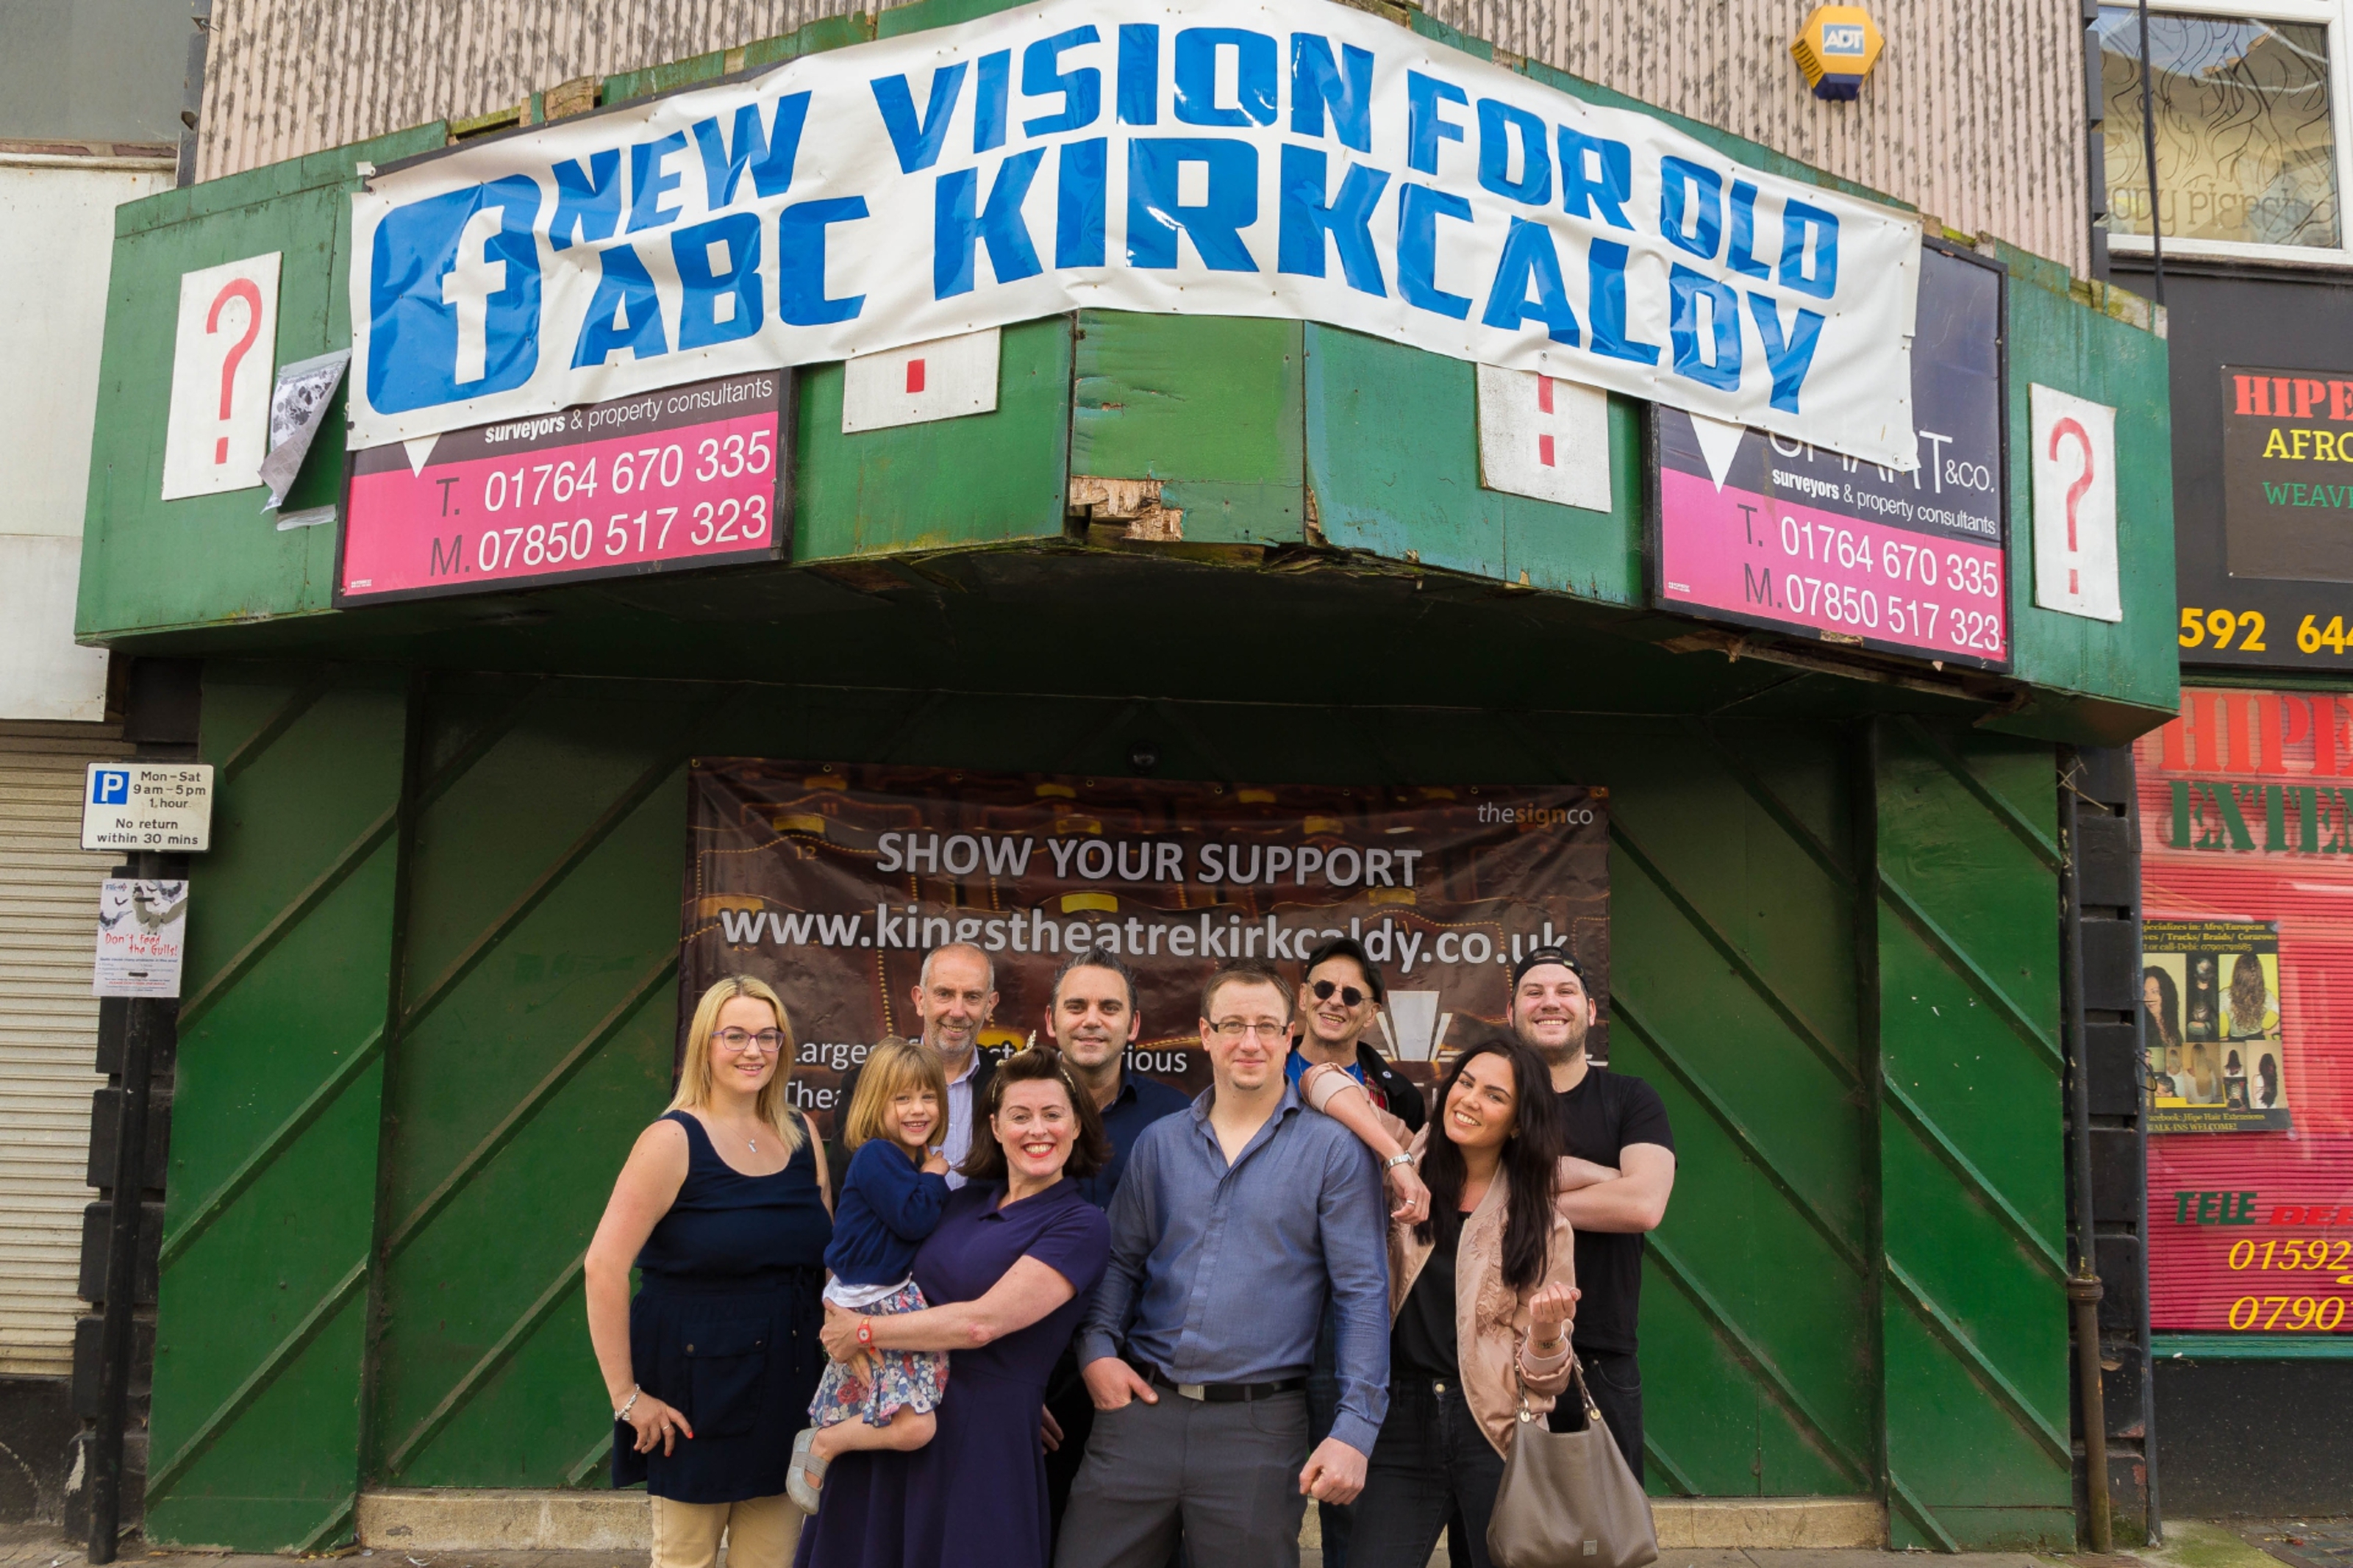 Kings Theatre Kirkcaldy members celebrate taking control of the former cinema building.